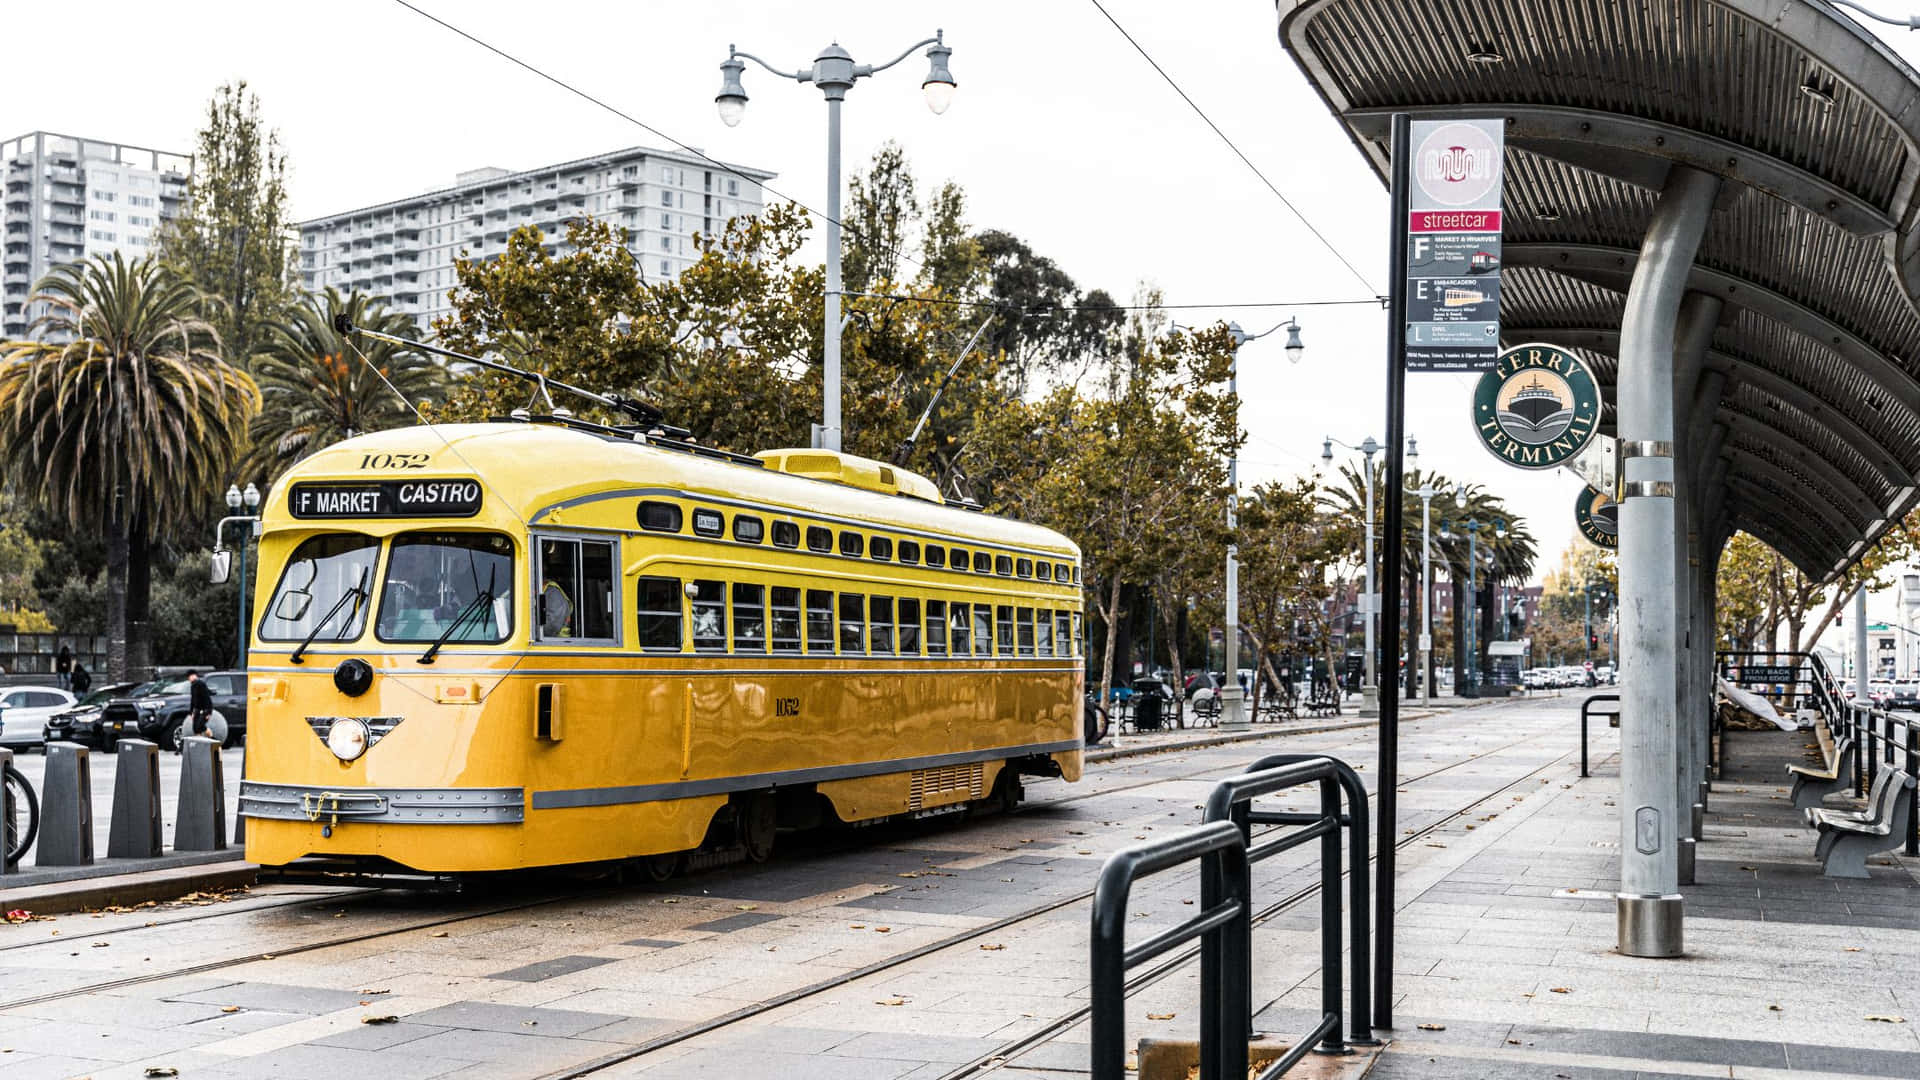 Enjoy the sights of San Francisco from across the bay.